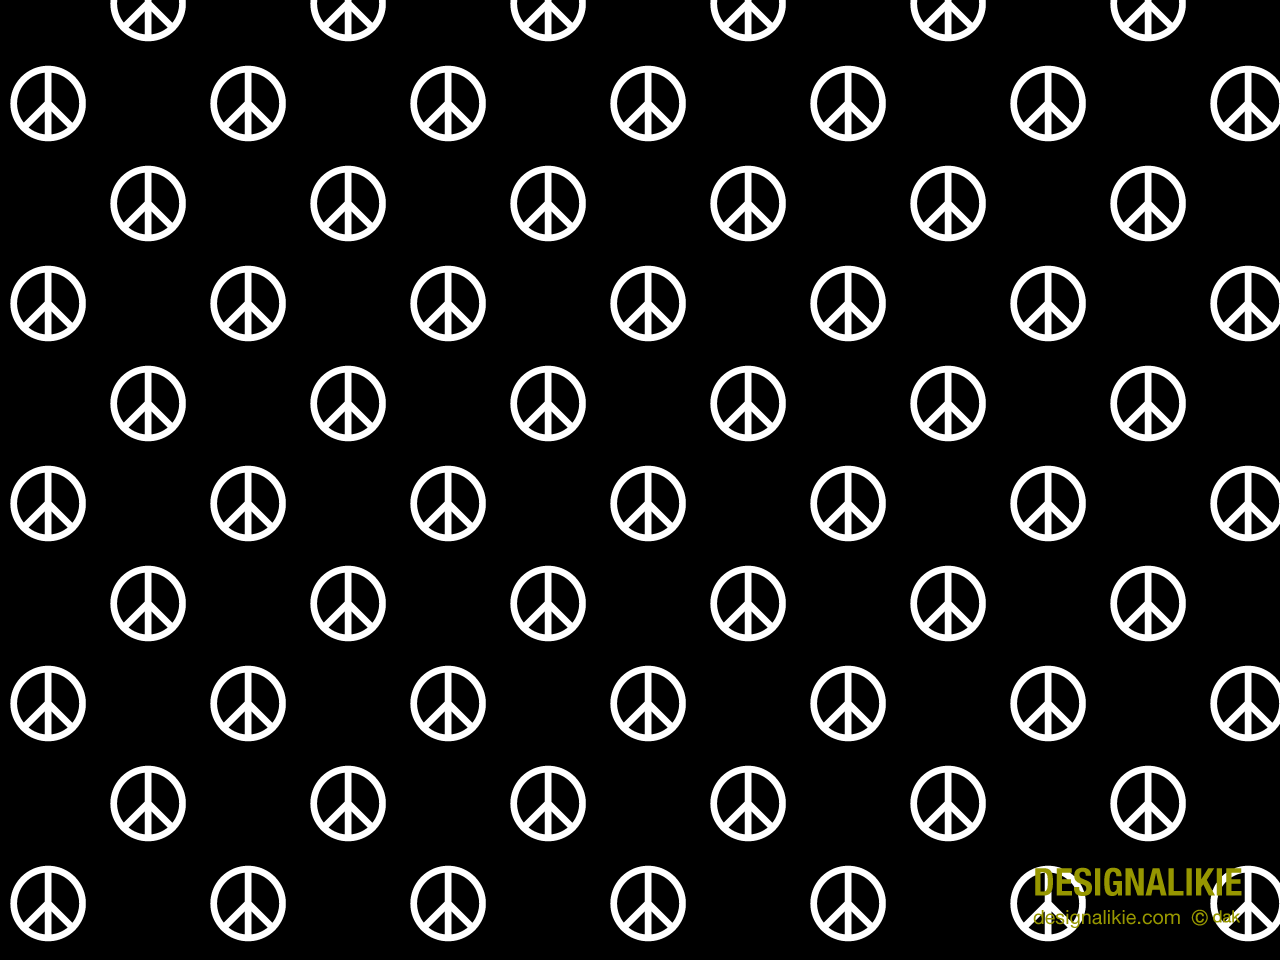 Wallpaper Peace Signs. Free Photo Download For Android, Desktop